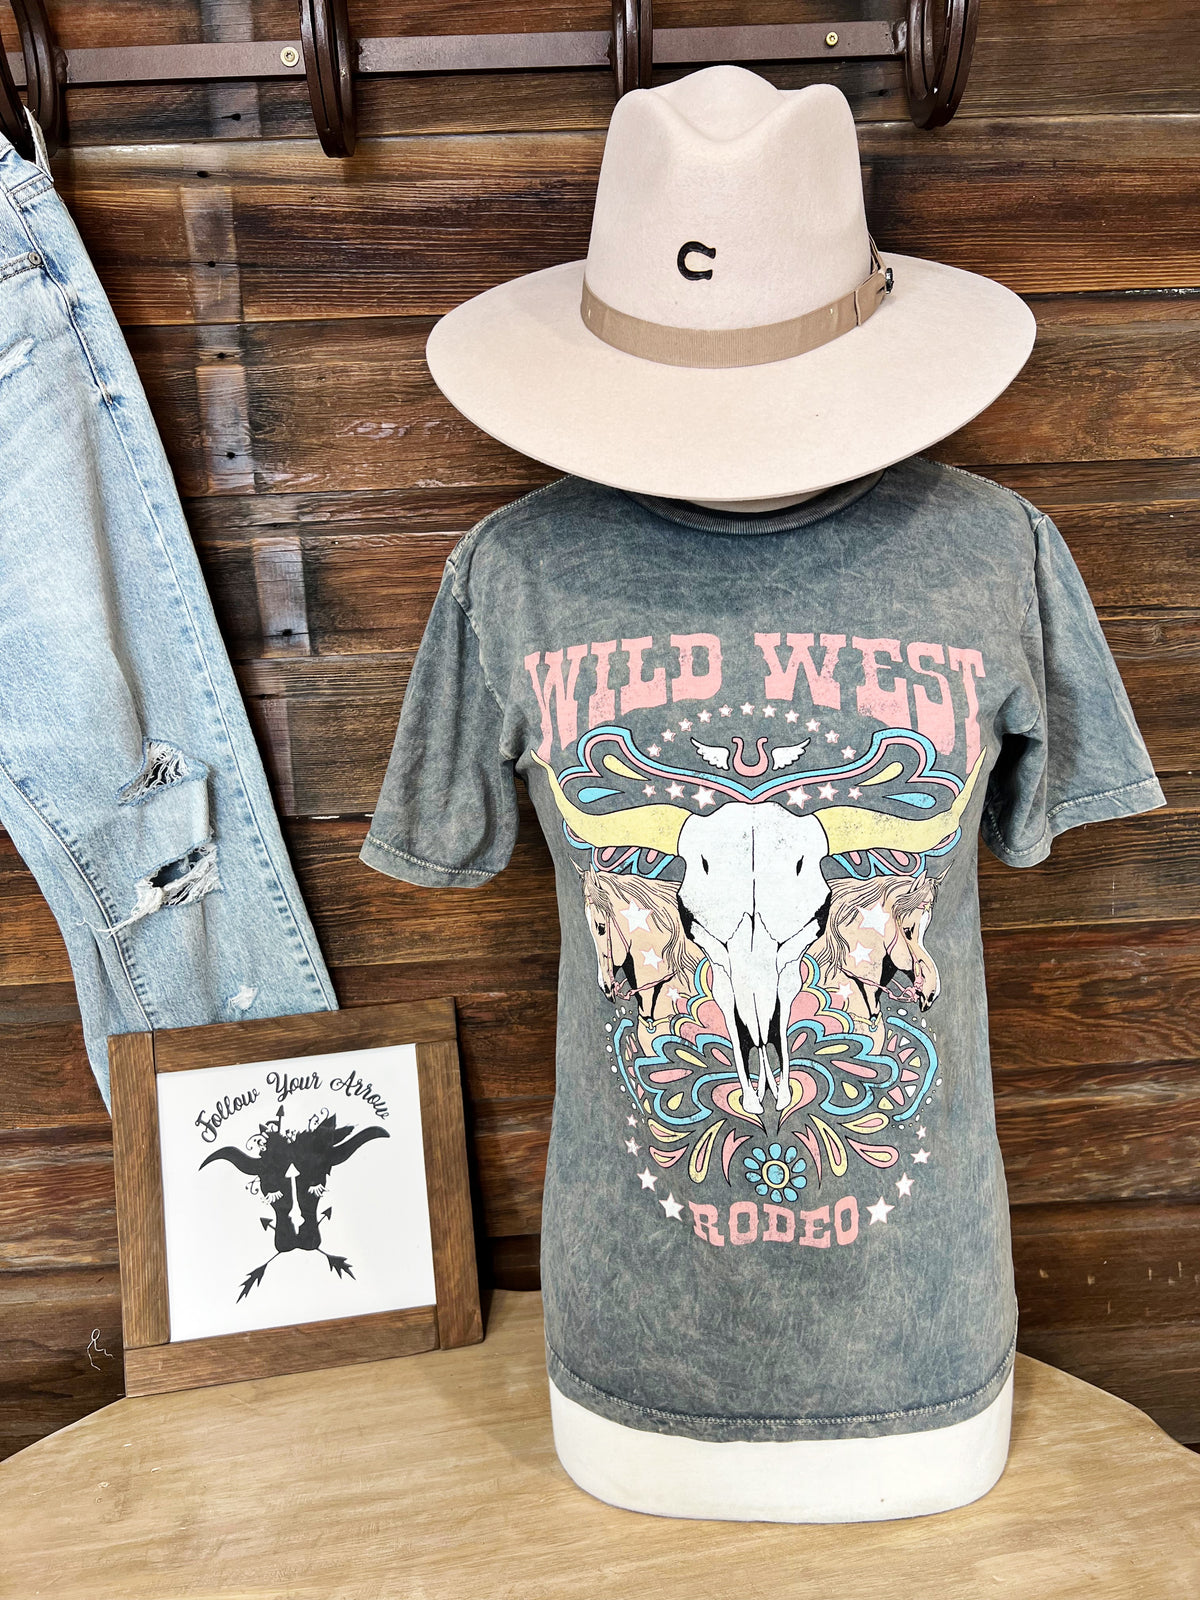 The Wild West Rodeo Tee